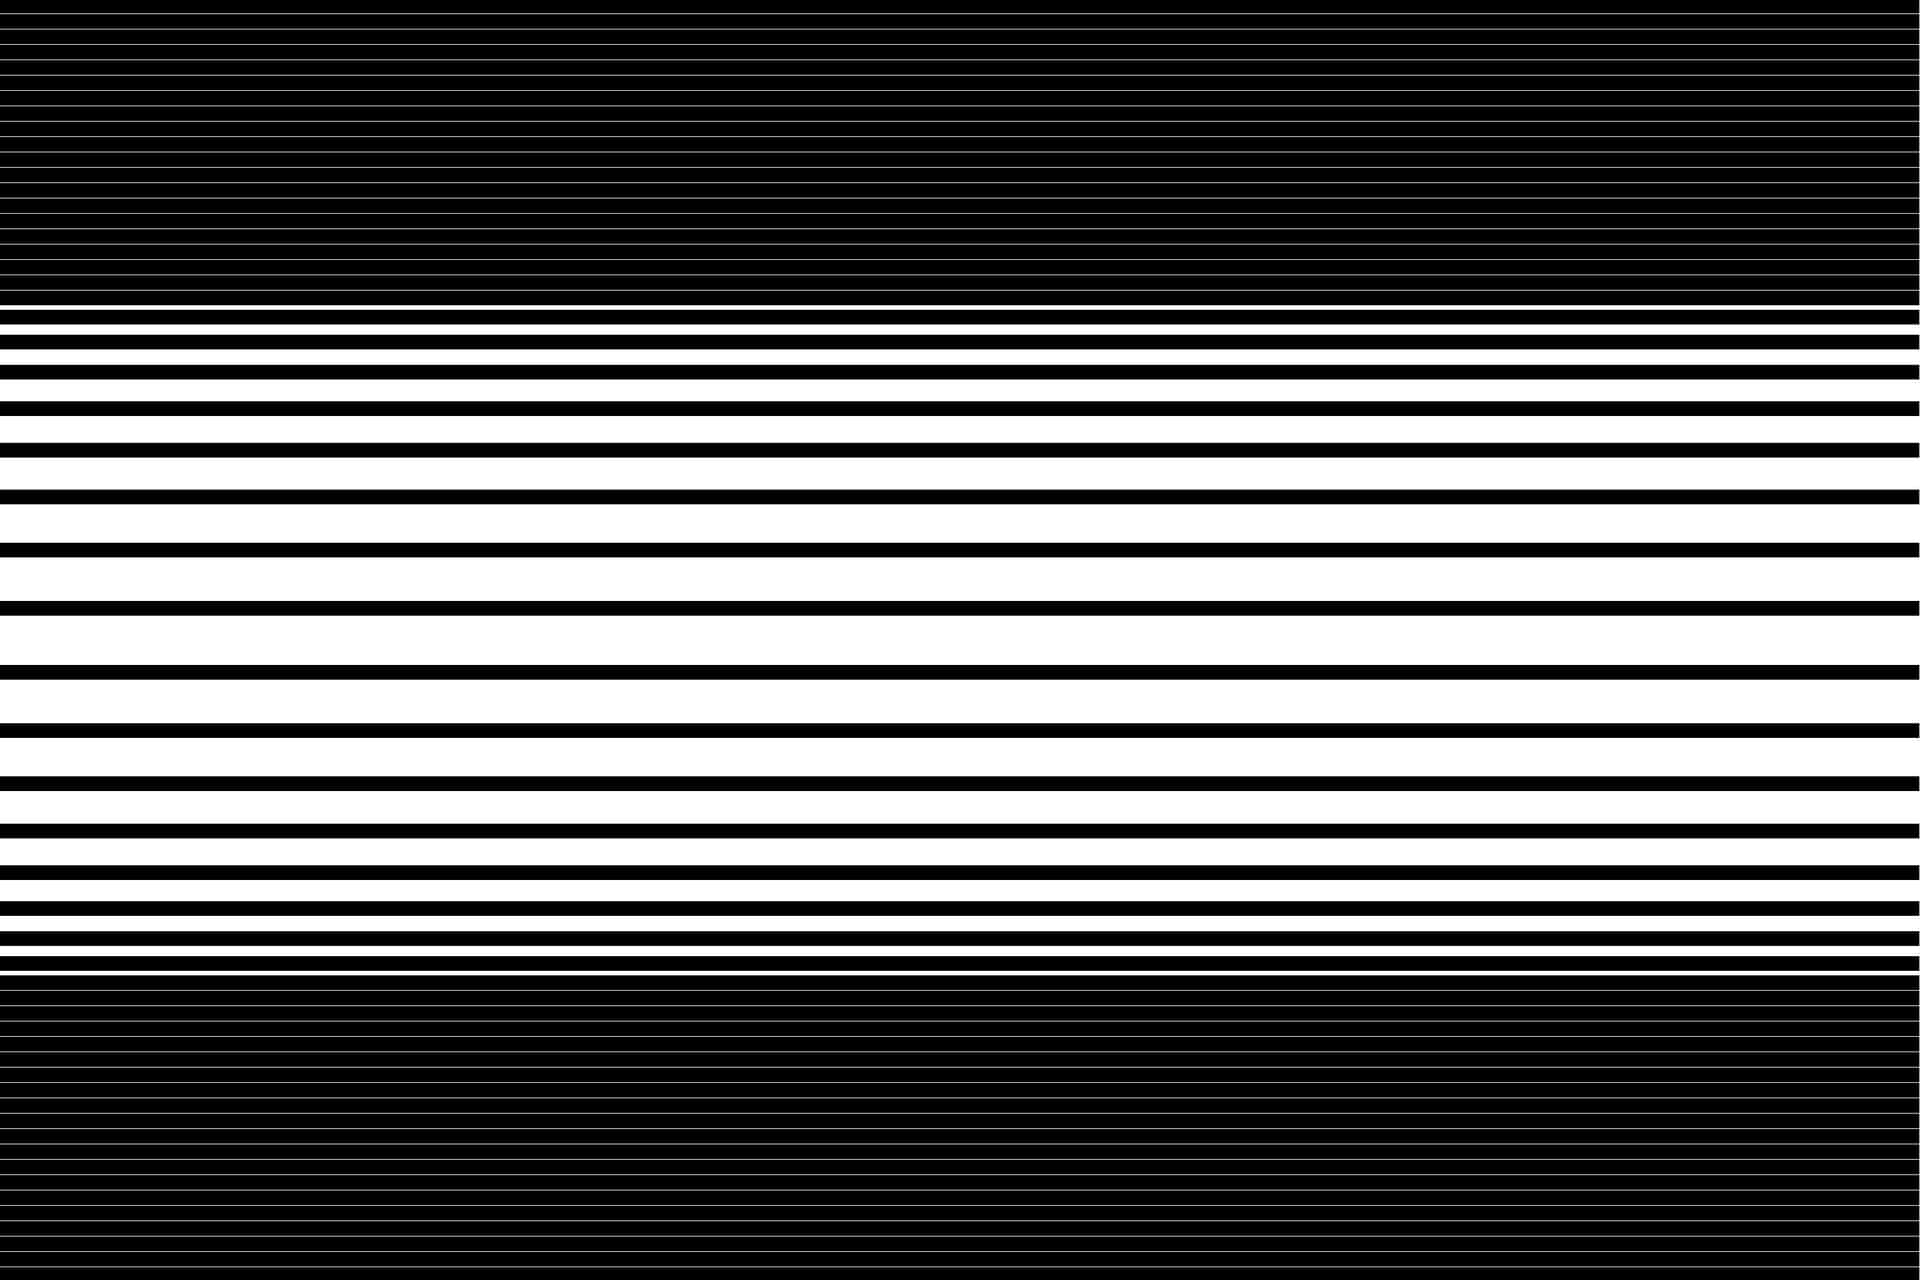 Black and White Striped Abstract Background